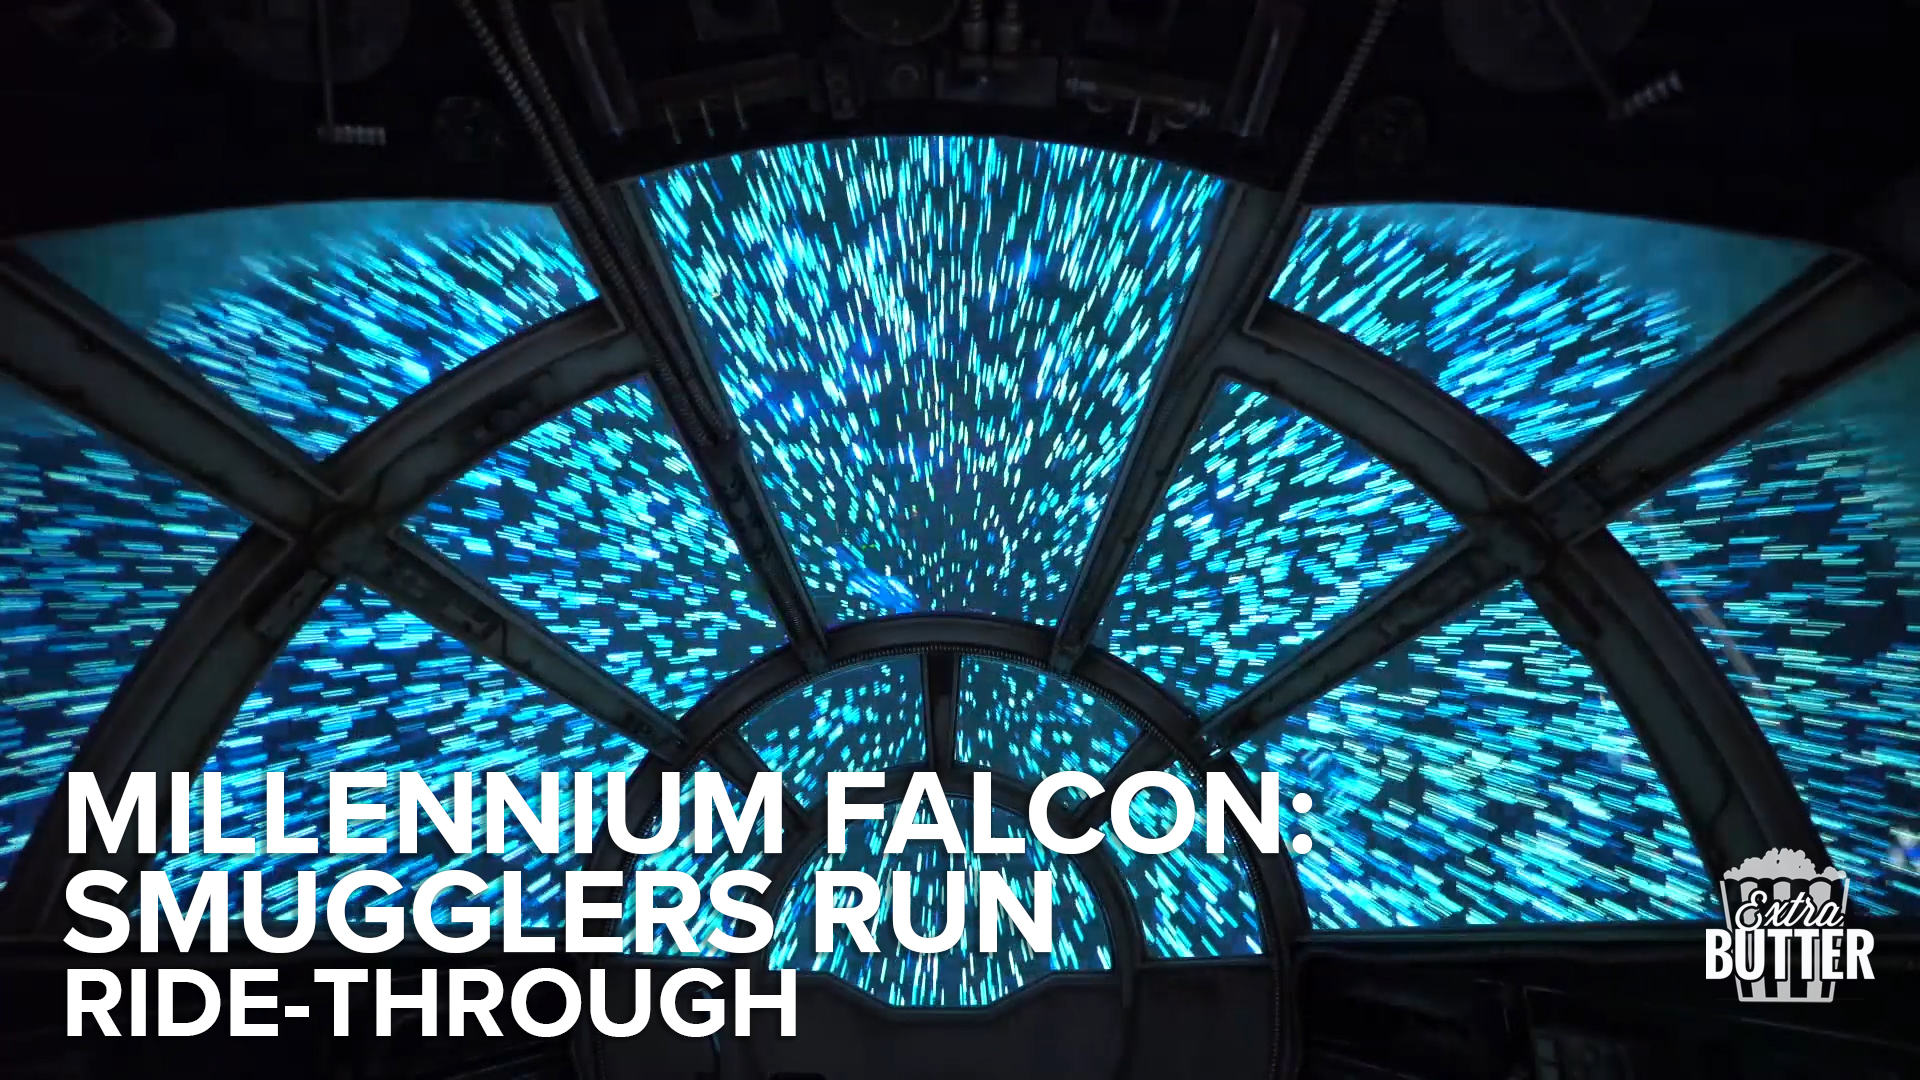 Take a ride on the Millennium Falcon in the new Star Wars themed ride at Disneyland, 'Smugglers Run.' The new Star Wars land called Galaxy's Edge opens at Disneyland on May 31.